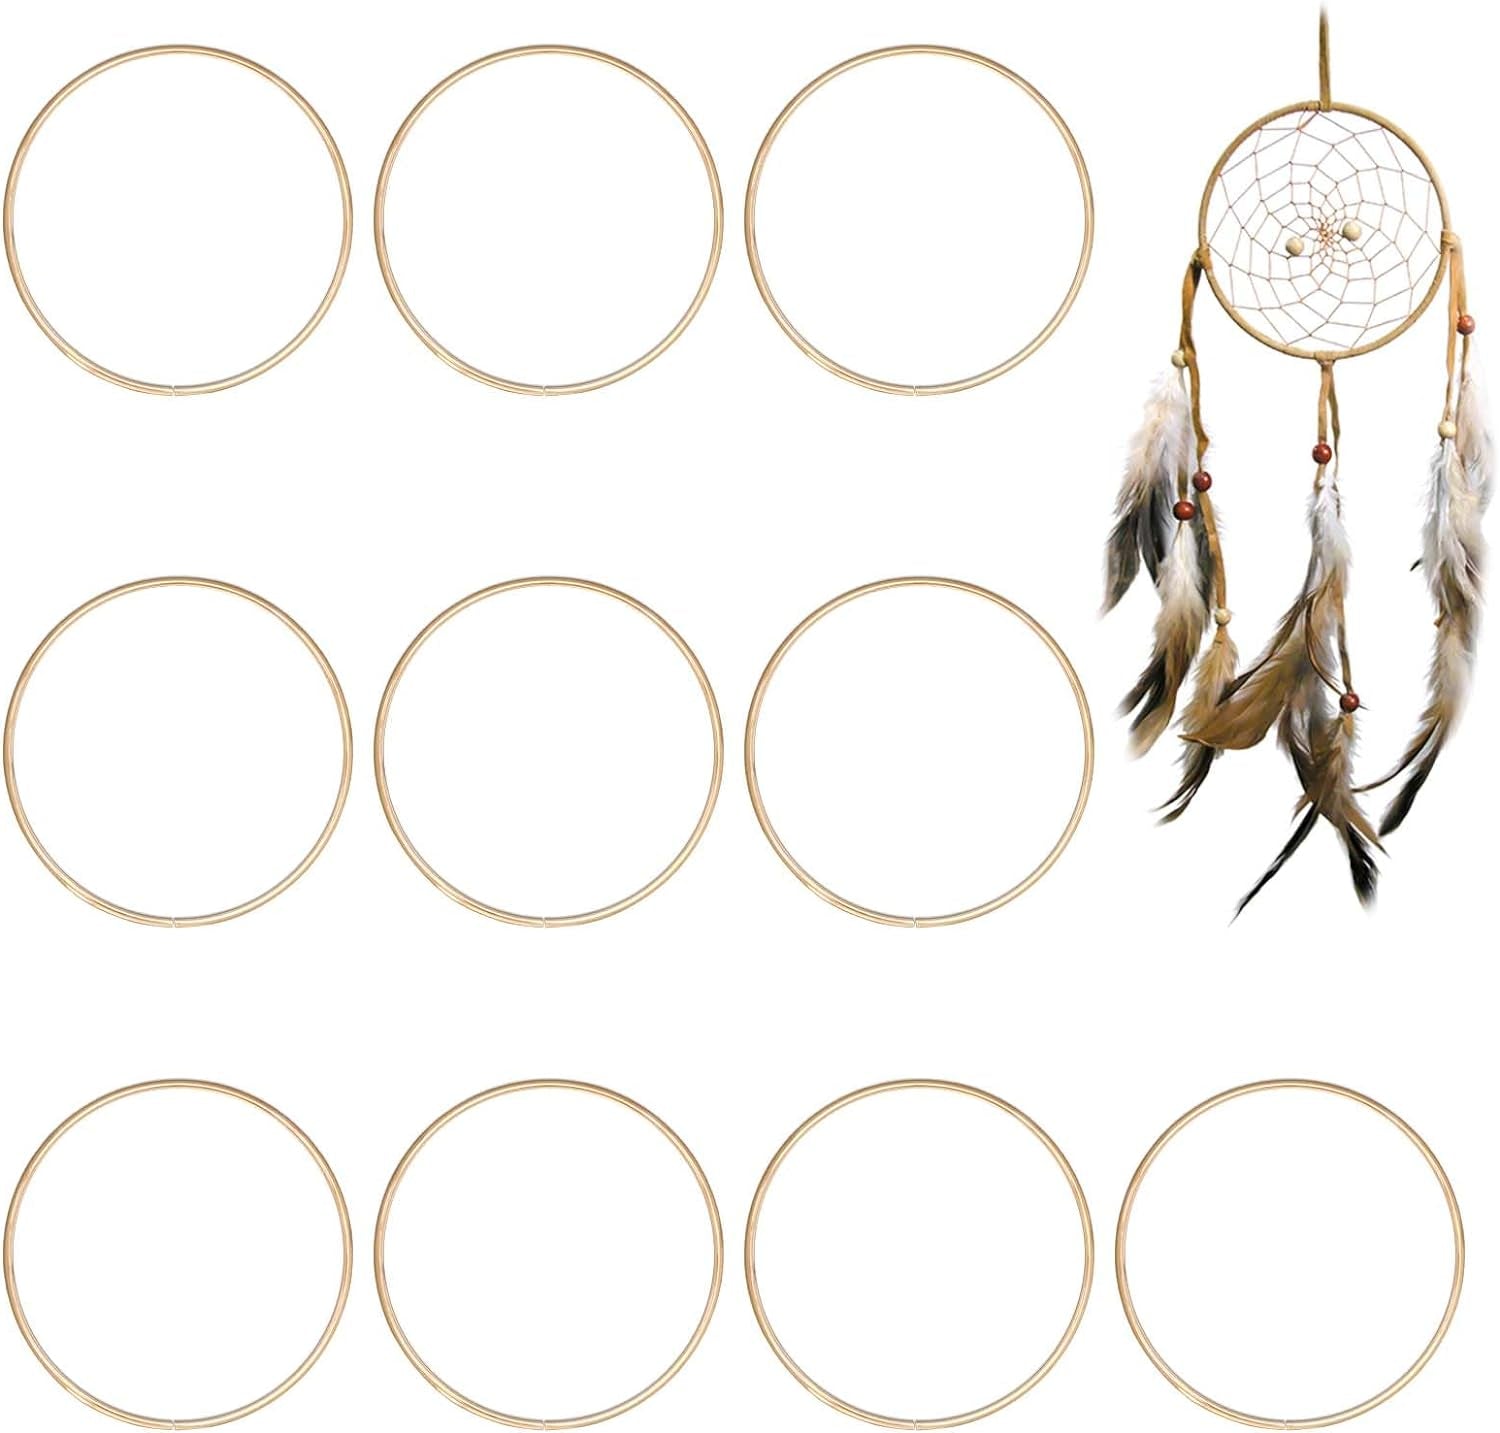 10 Pack Metal Rings for Crafts, Dream Catcher Rings 3 Inch, Flower Rings for Macrame, Metal Craft Rings for DIY Tassel Dream Catchers Holiday Celebration Wedding Table Wreath Decor